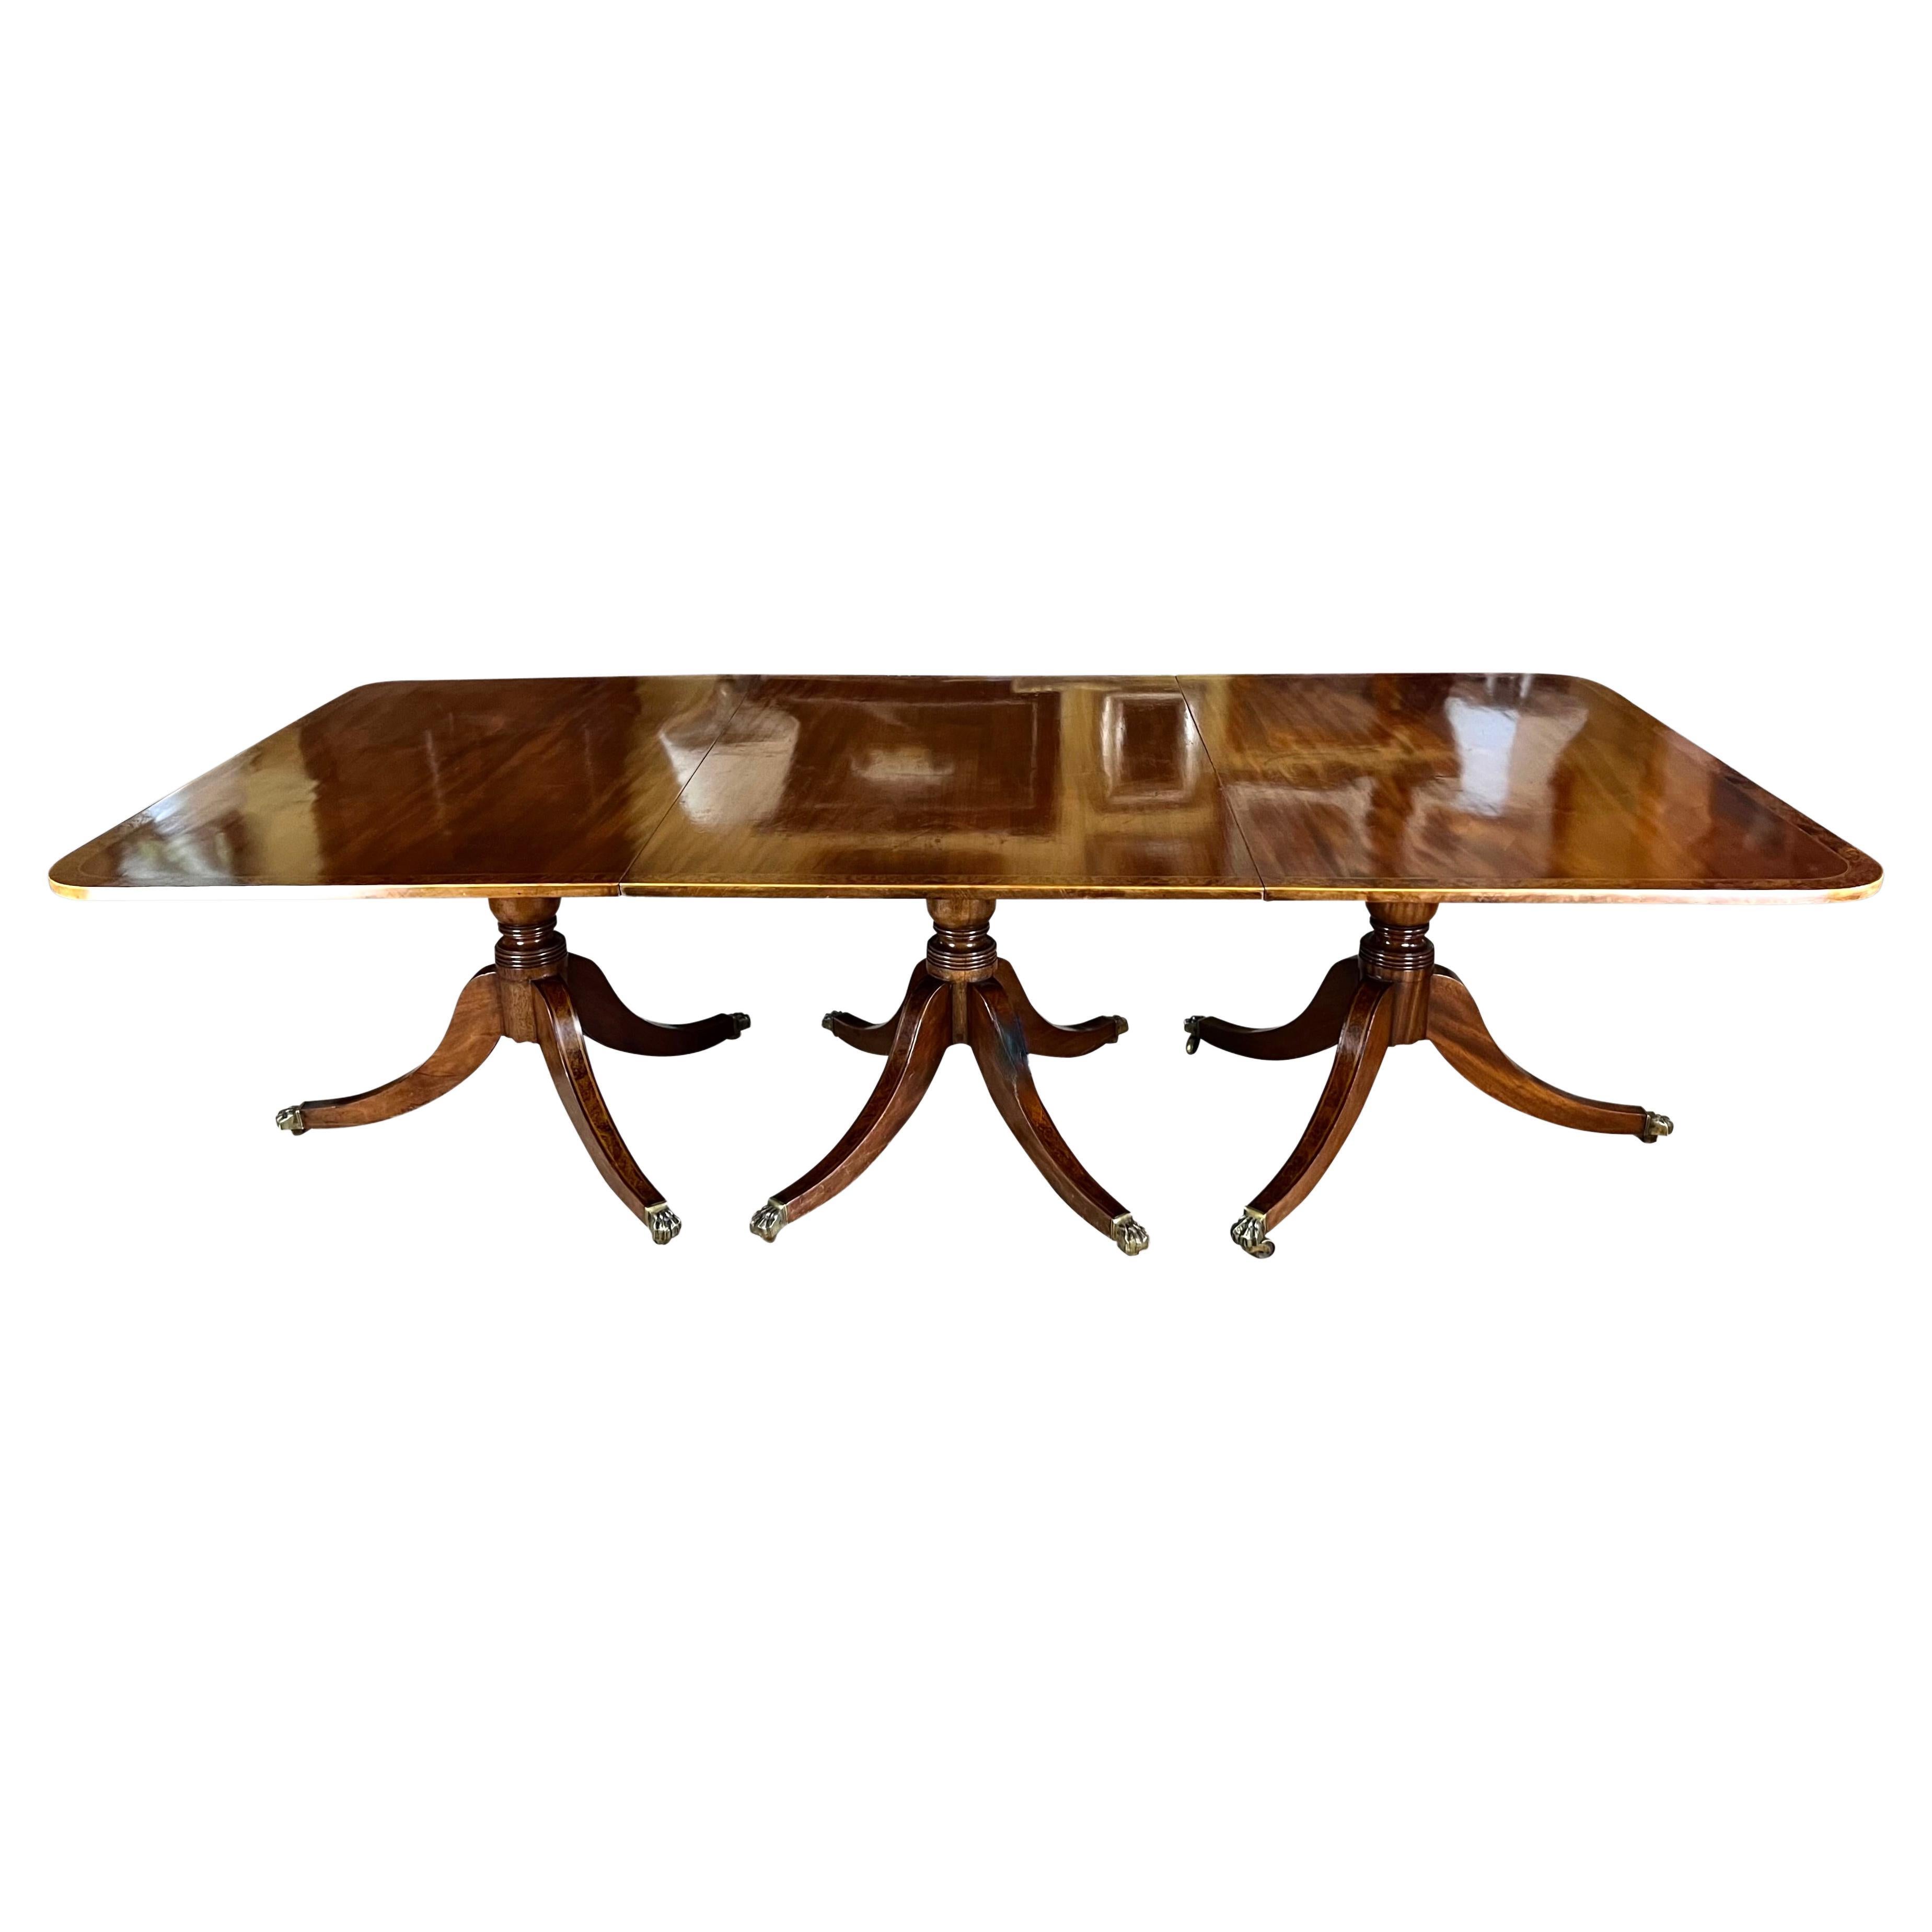 Georgian Style Burl Elm Crossbanded Mahogany 3 Pedestal Dining Table with Leaves